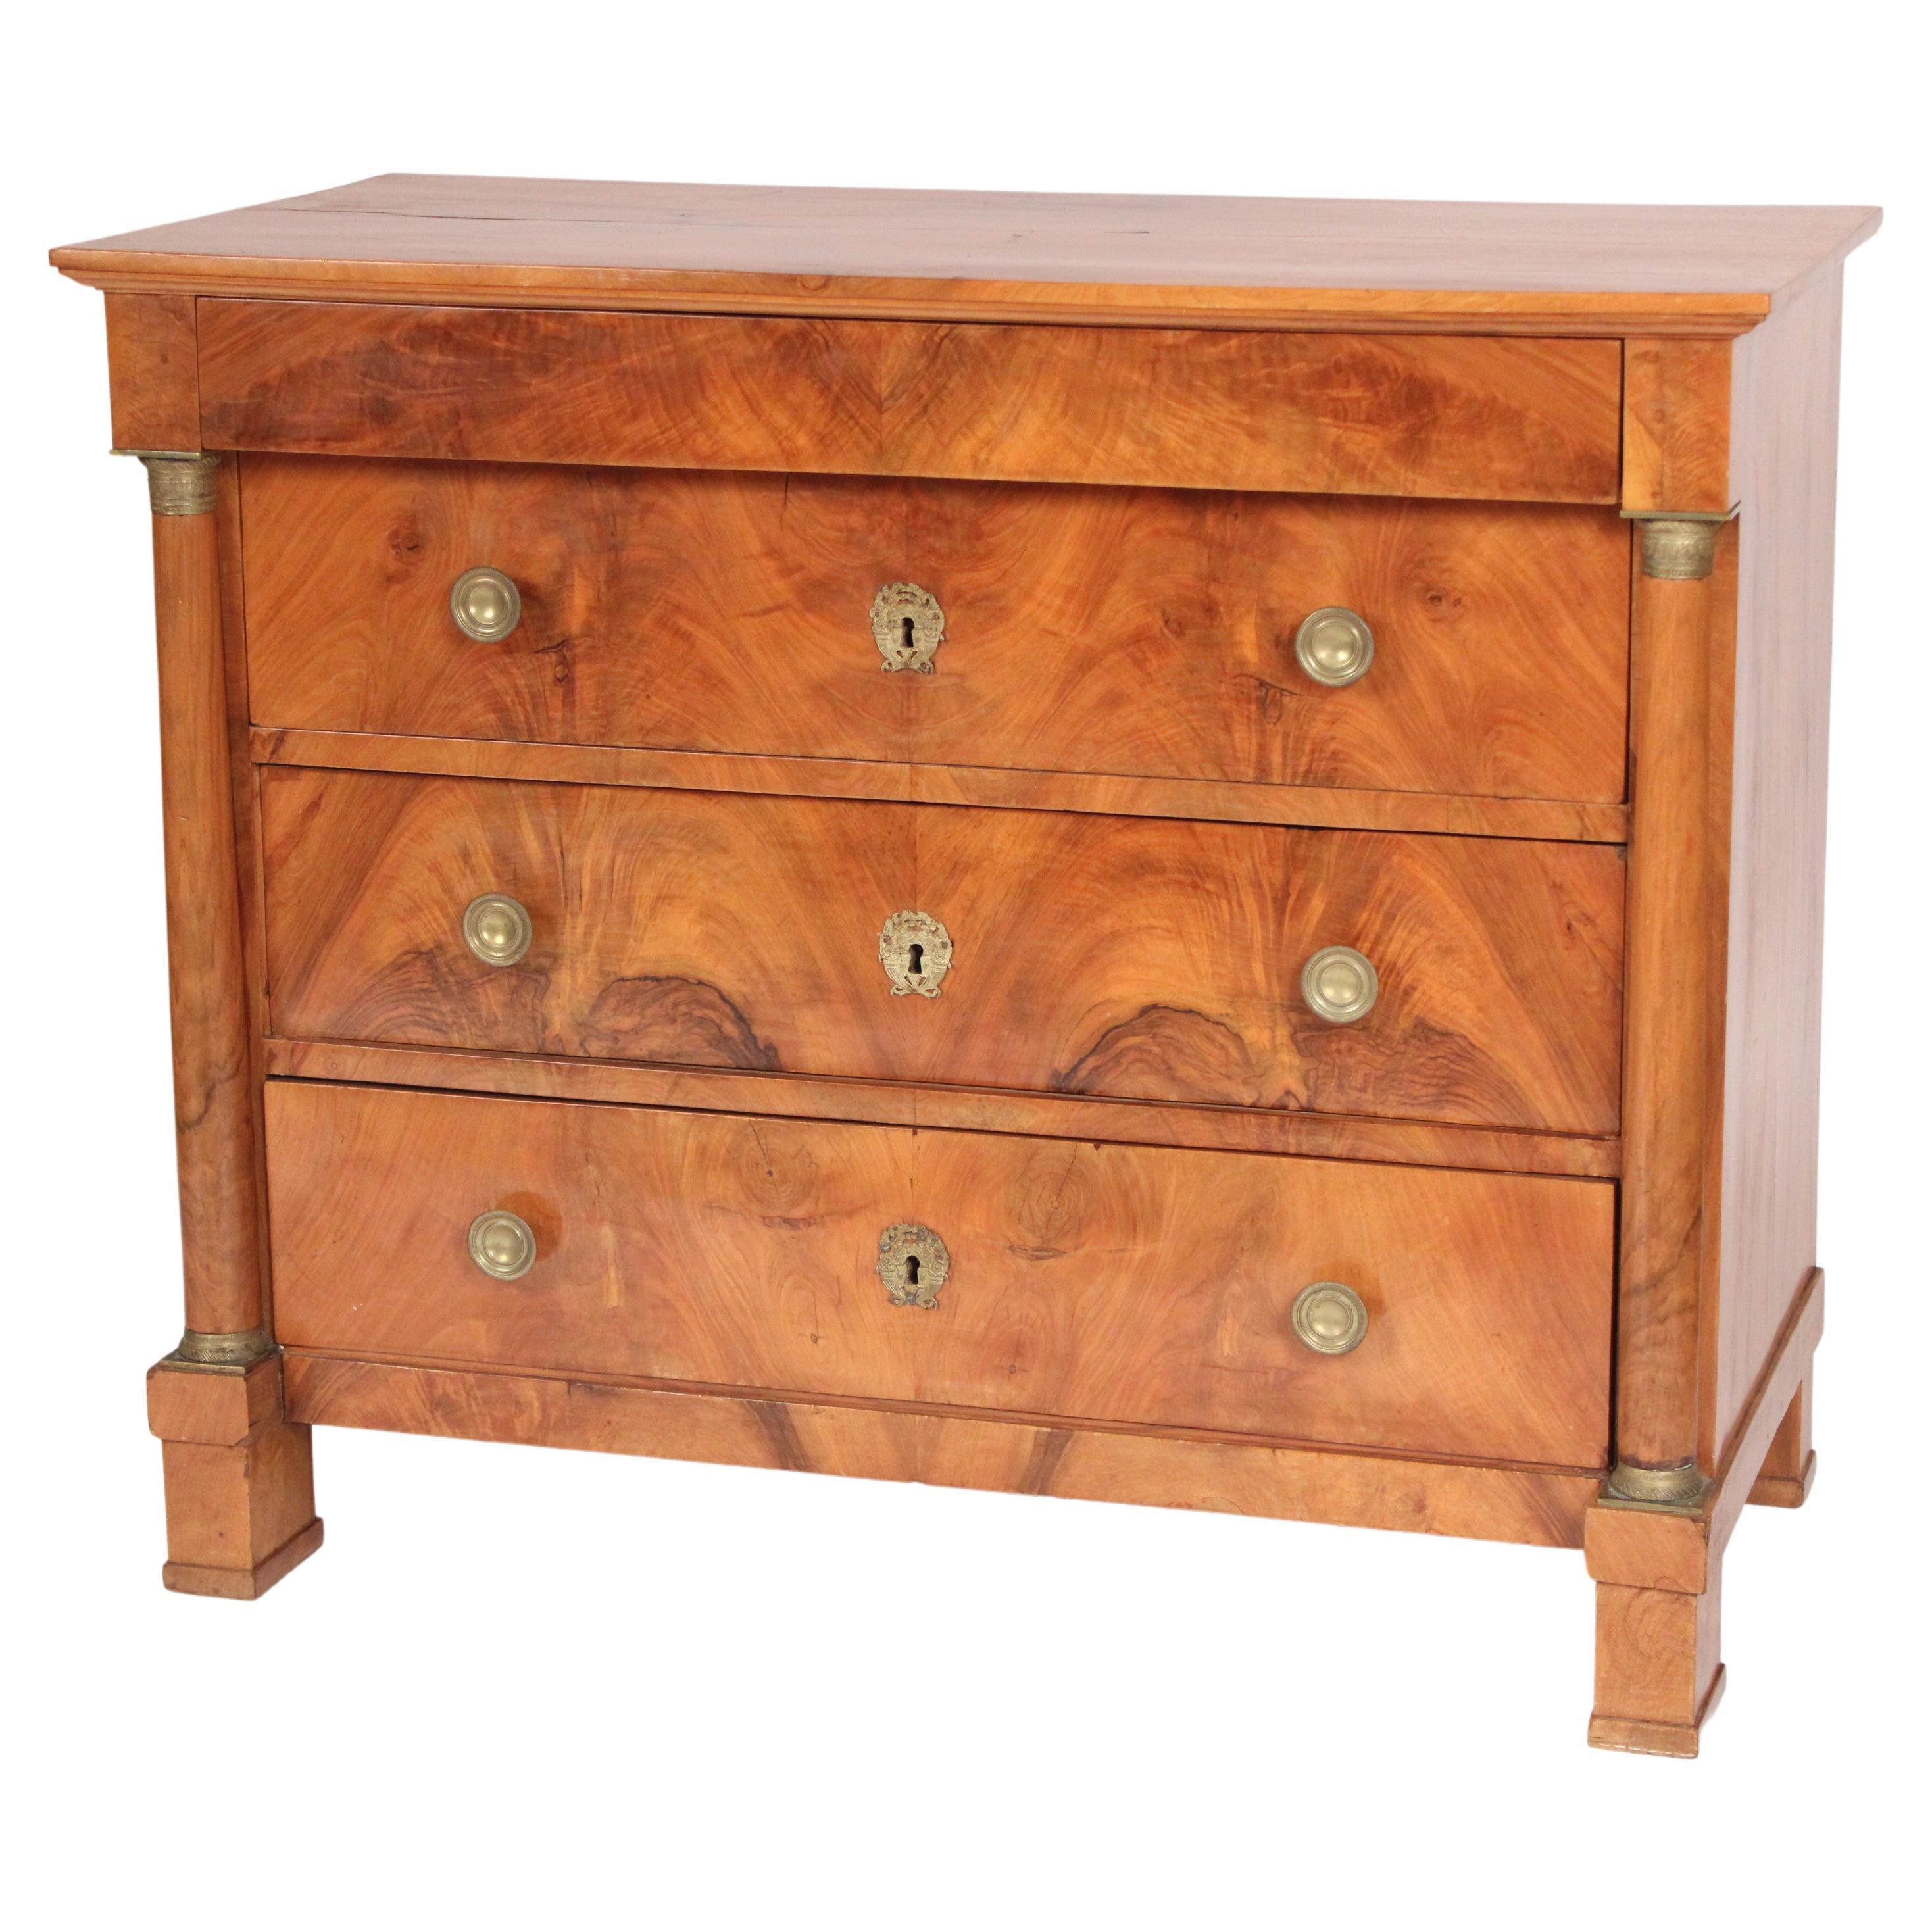 Antique Empire Style Burl Walnut Chest Of Drawers